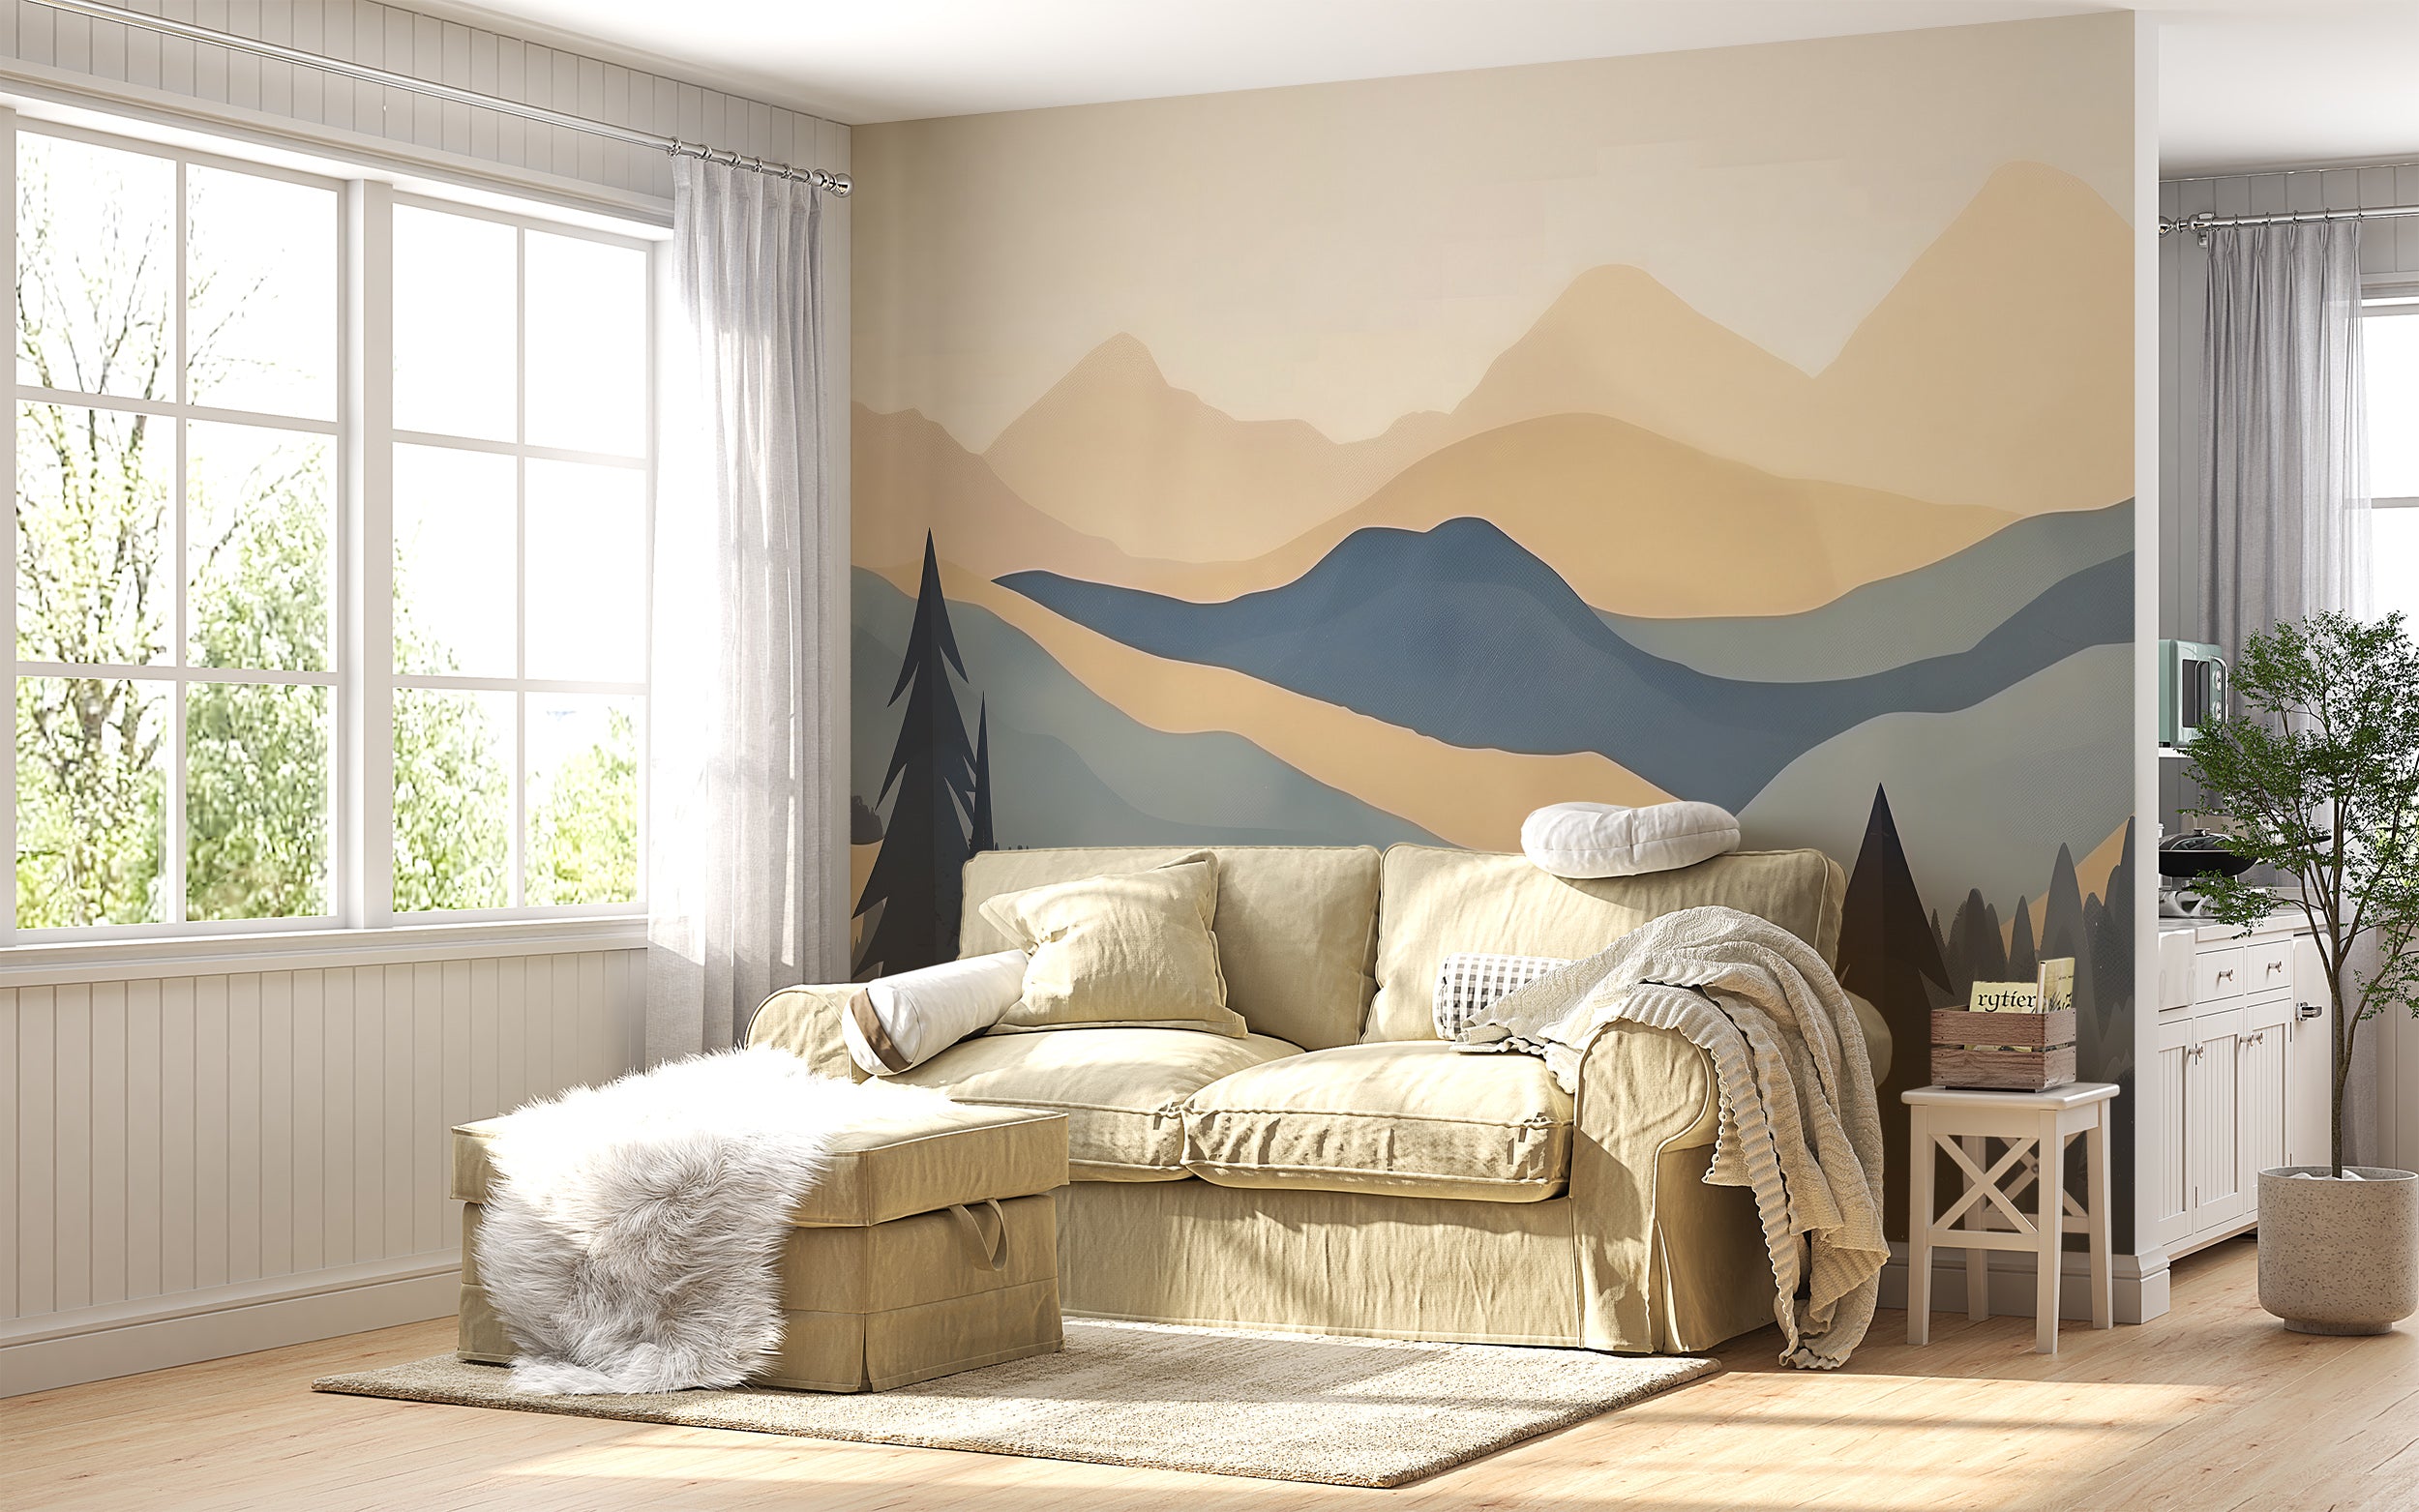 Boho Mountains and Forest Mural, Peel and Stick Landscape Mural, Beige and Blue Nature Wallpaper, Soft Watercolor Mountains Decor